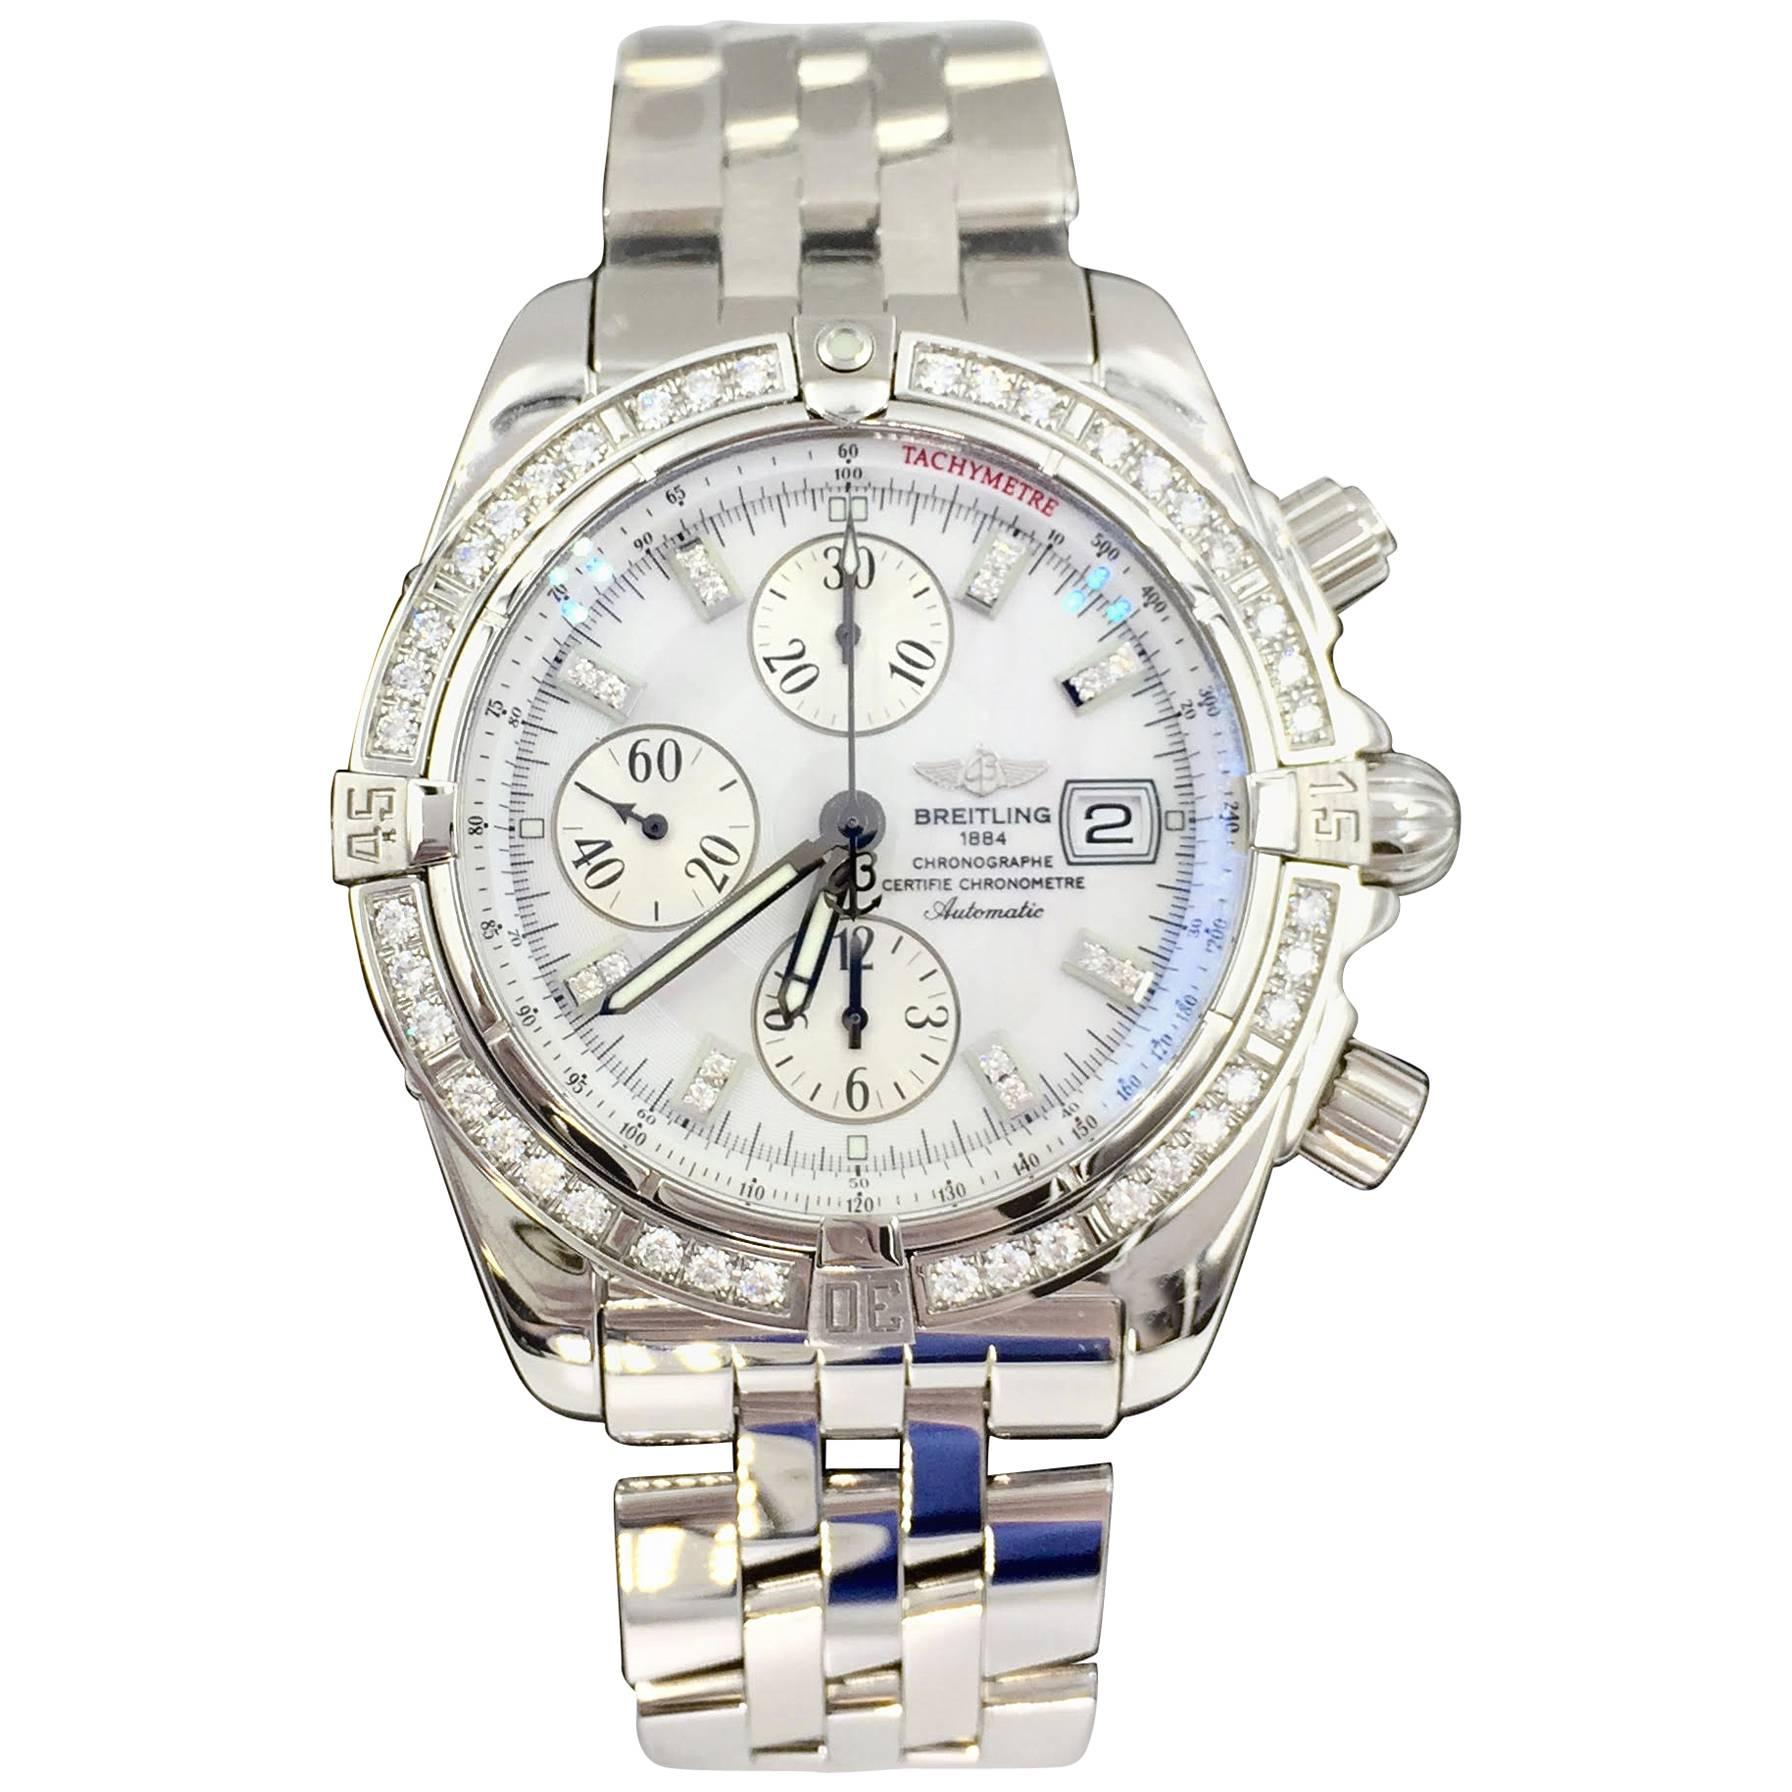 Breitling Stainless Mother-of-Pearl Diamond Evolution Chronometre Wristwatch